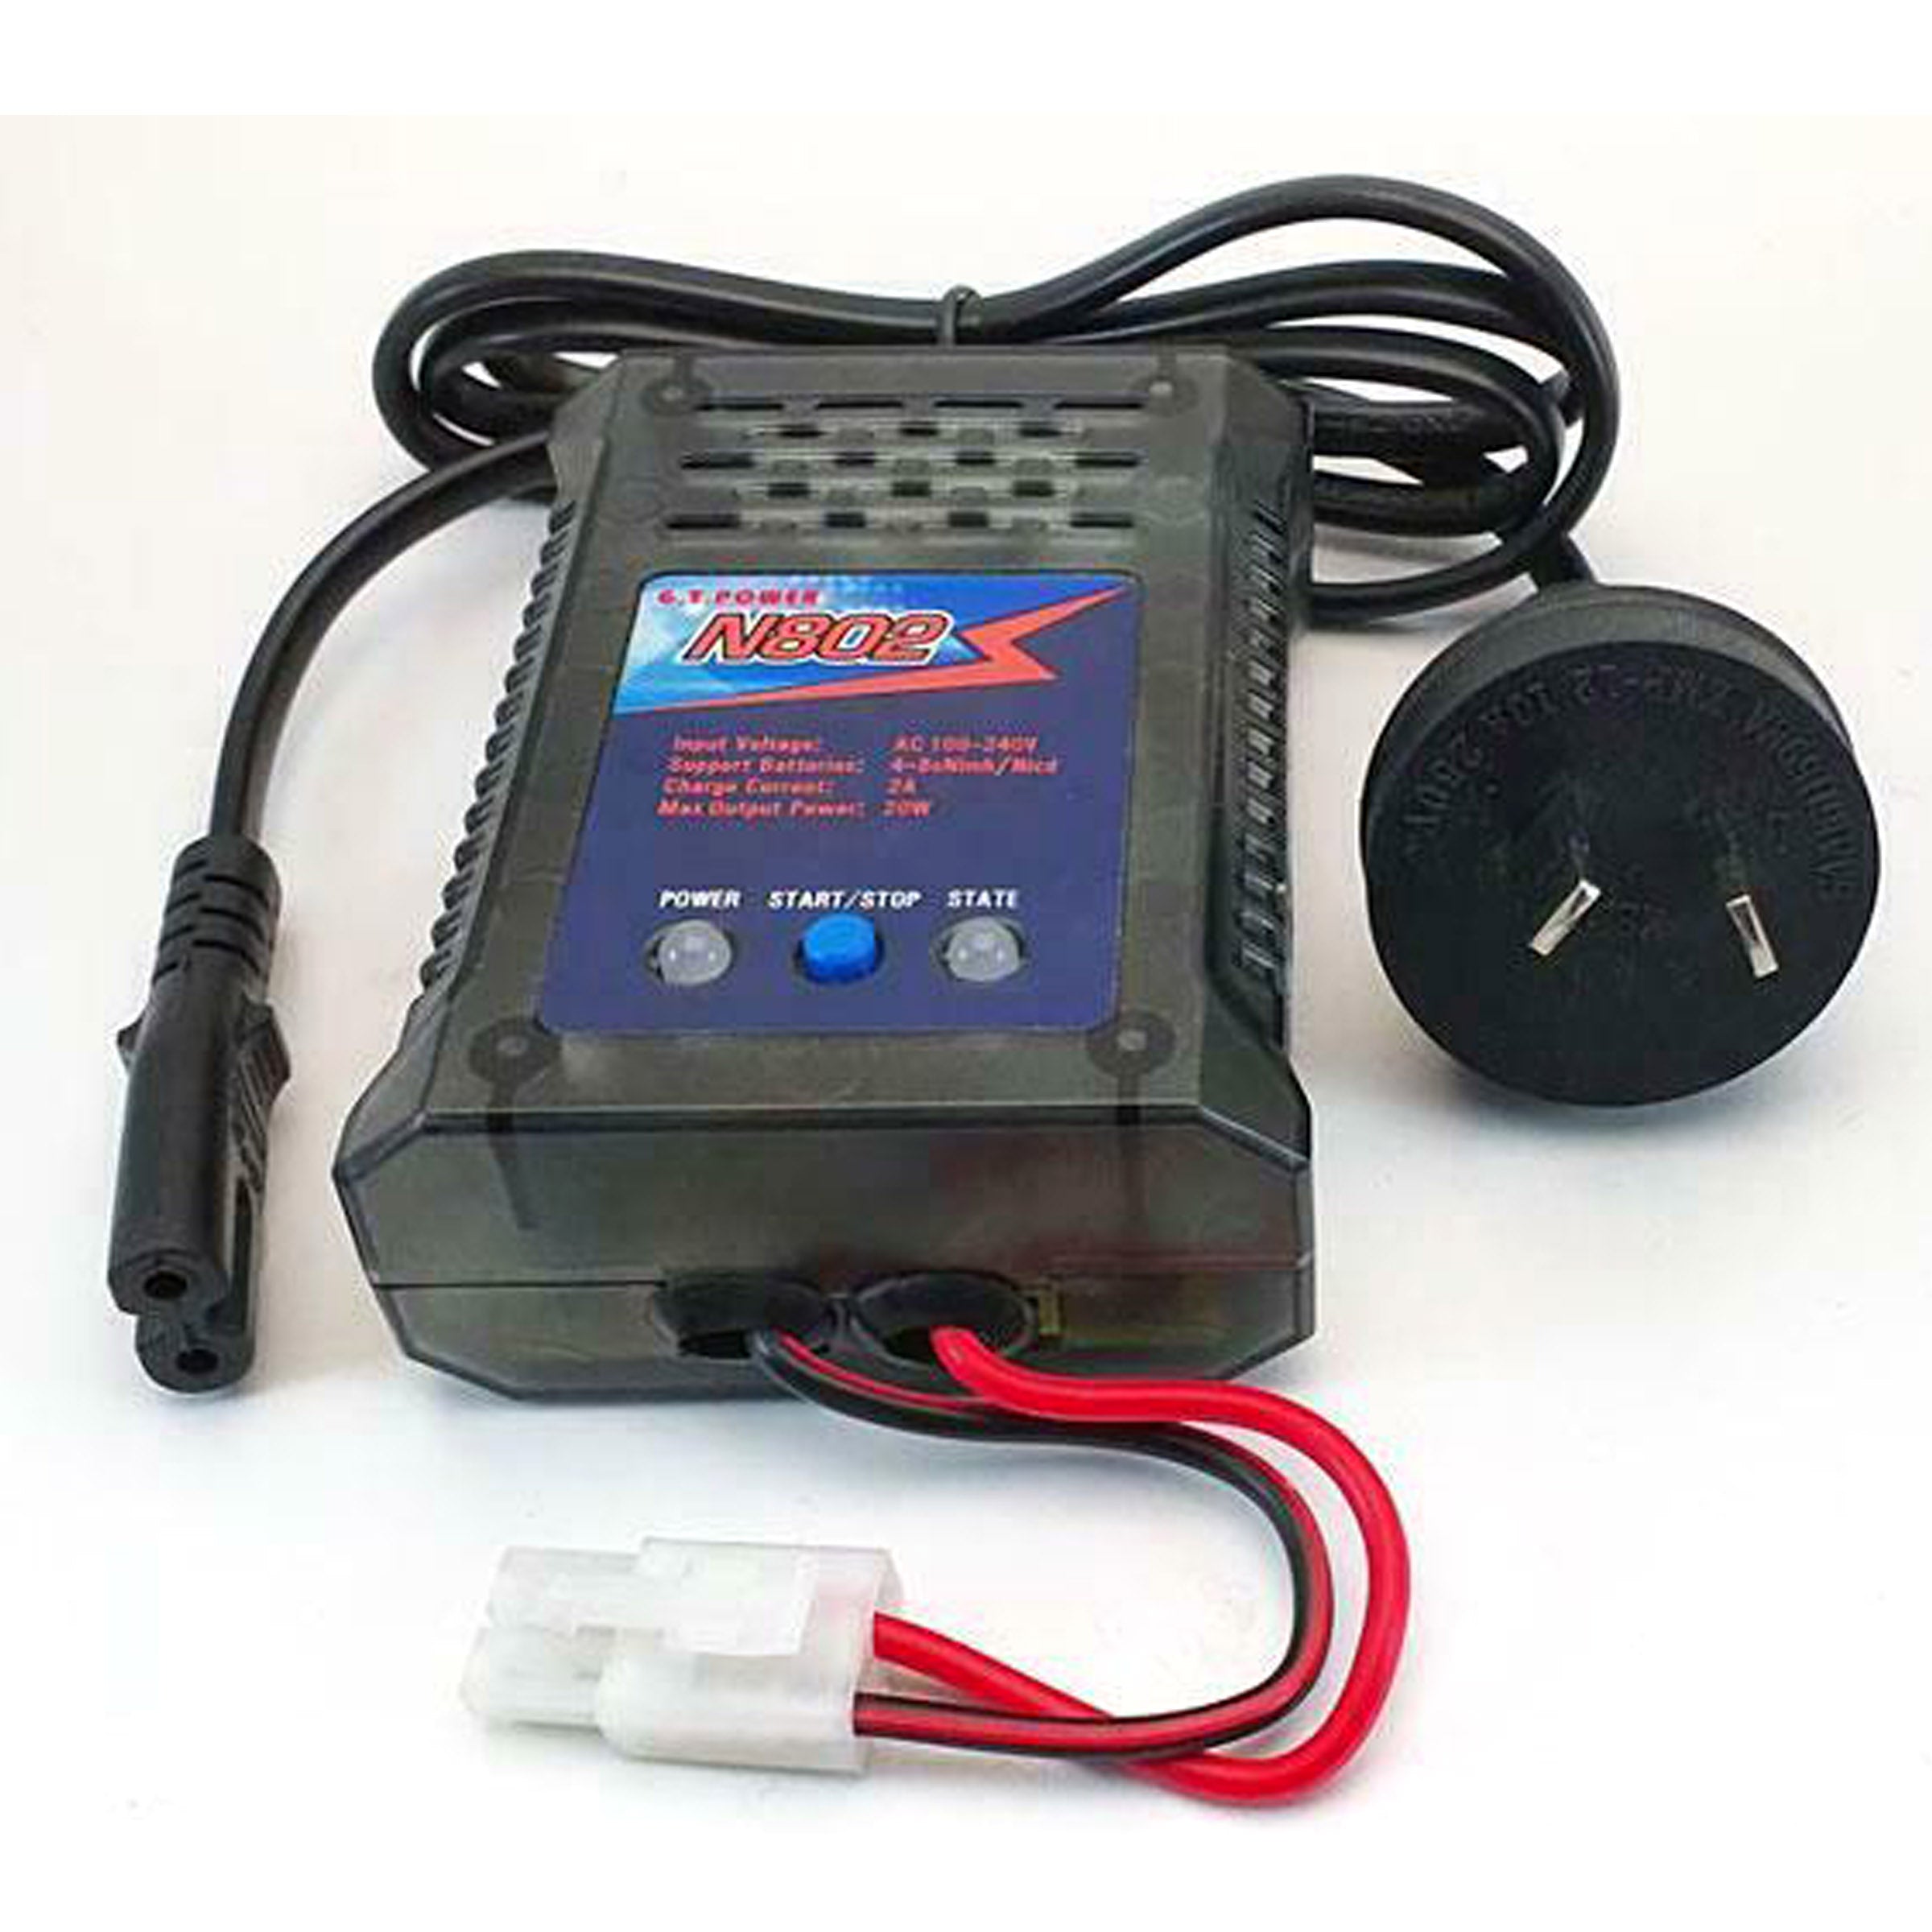 GT Power N802 NiMH NiCd Quick Battery AC Charger RC Hobby 2Amp Tamiya - 0